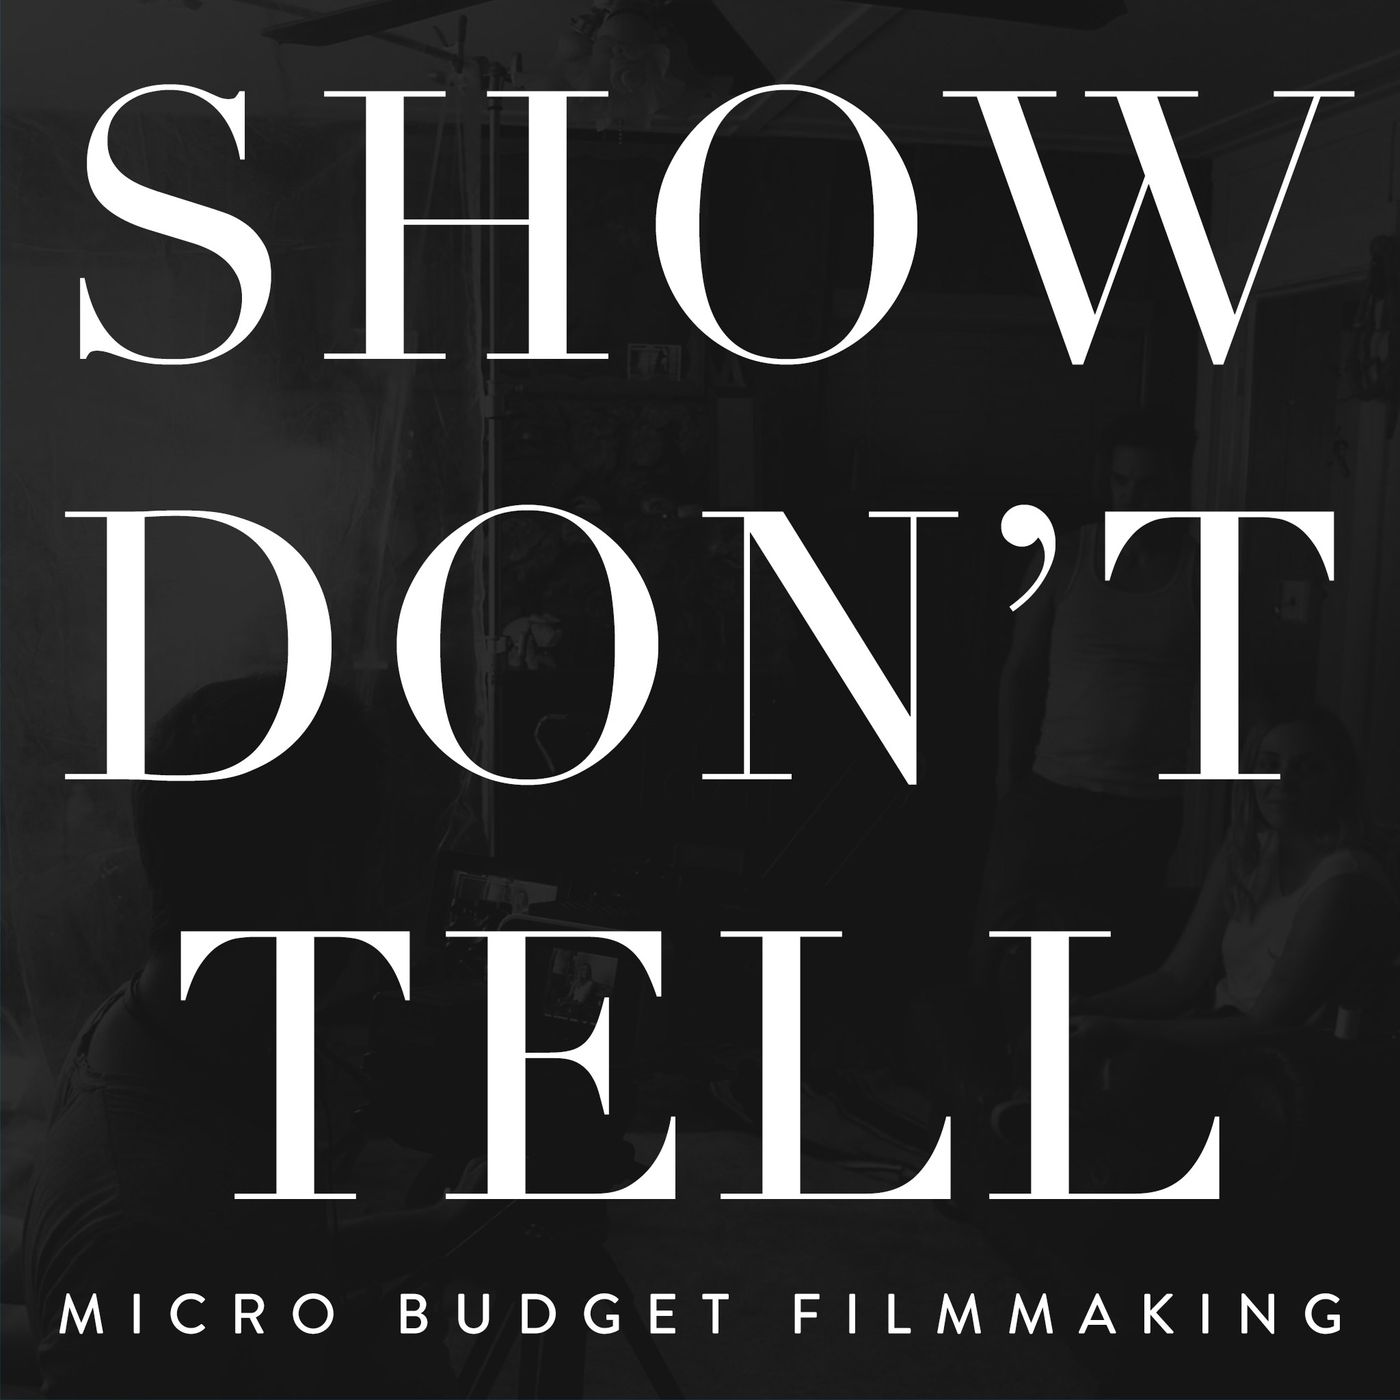 Directing a $67,000 Micro-Budget Feature Film With Joe McClean